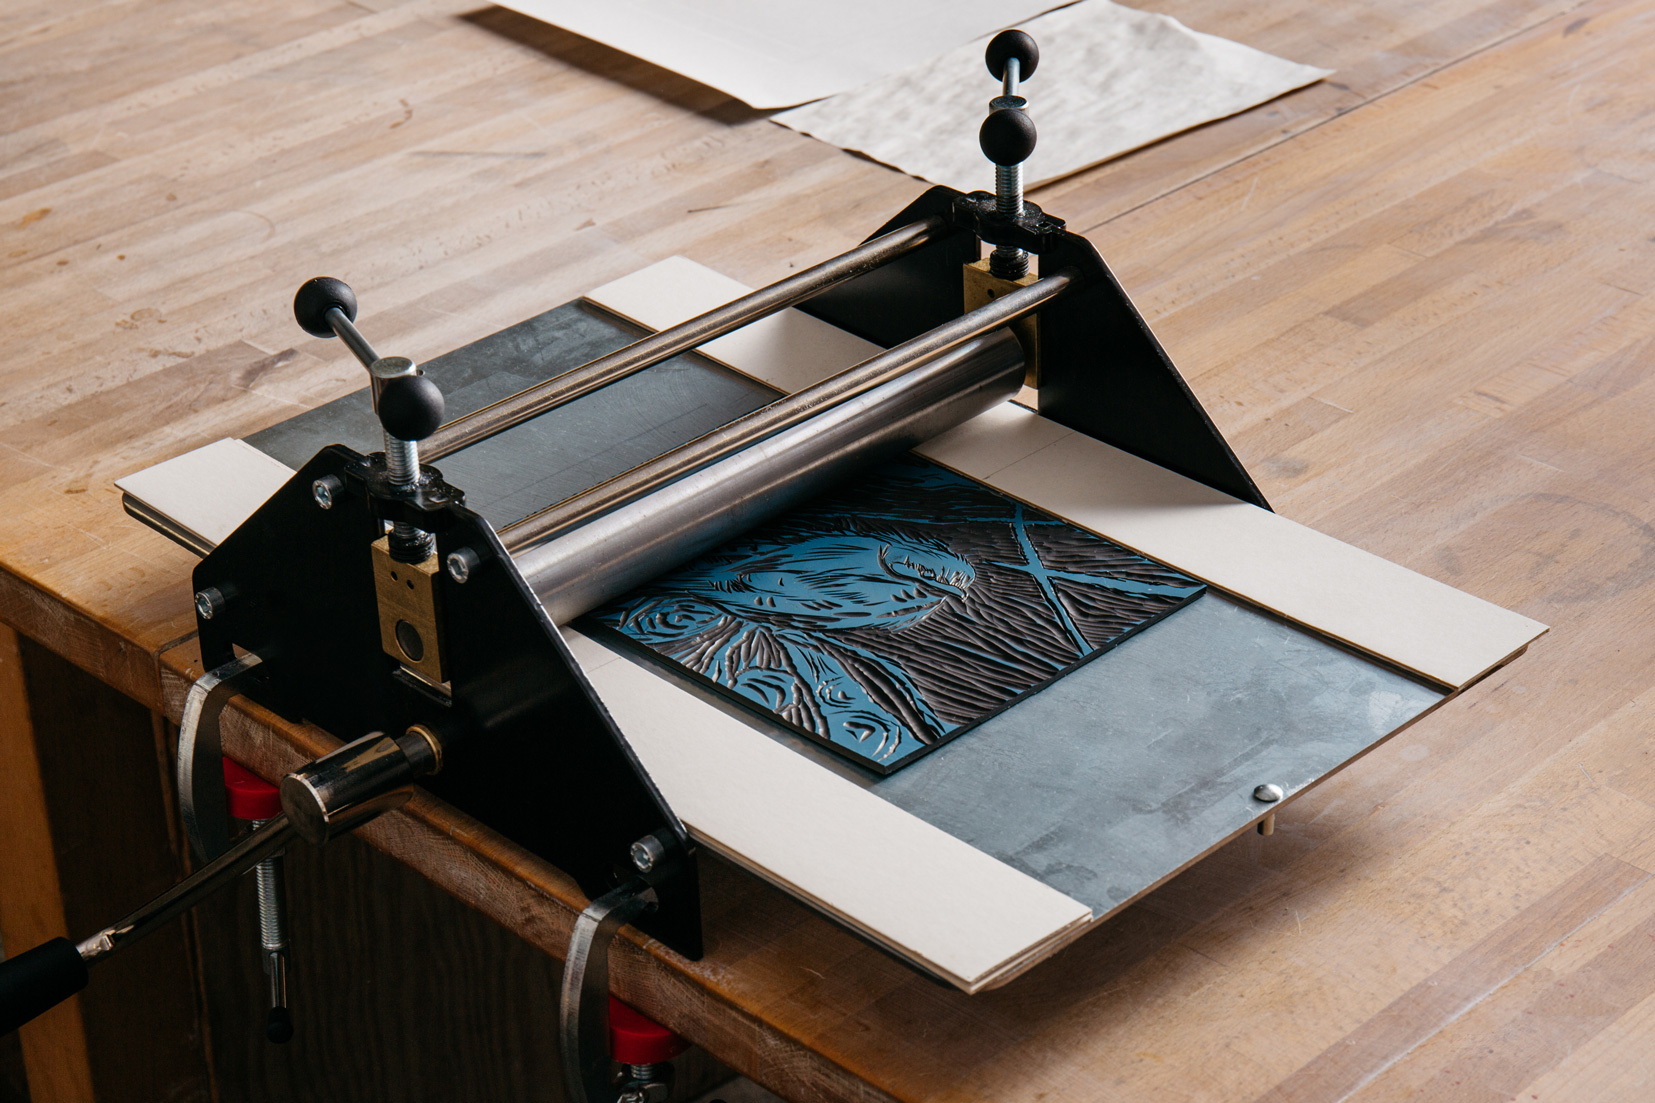 A black etching press on a wooden table, holding a blue inked linocut print. A sheet of paper partially covers the print, ready to be rolled through the press. The surrounding area is neatly organized, with additional paper in the background.